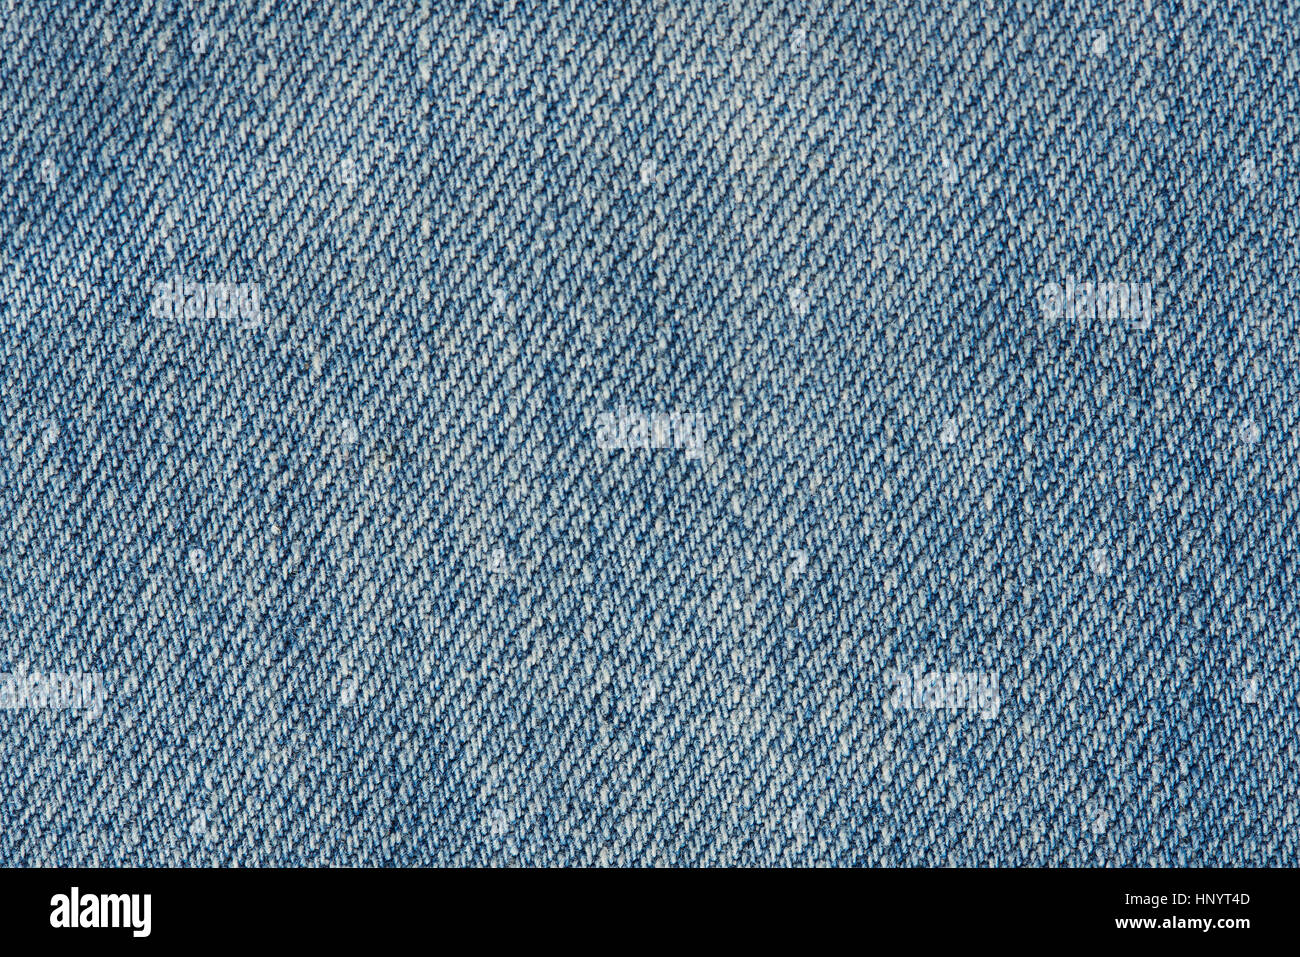 Blue jeans fabric background texture surface close up Stock Photo